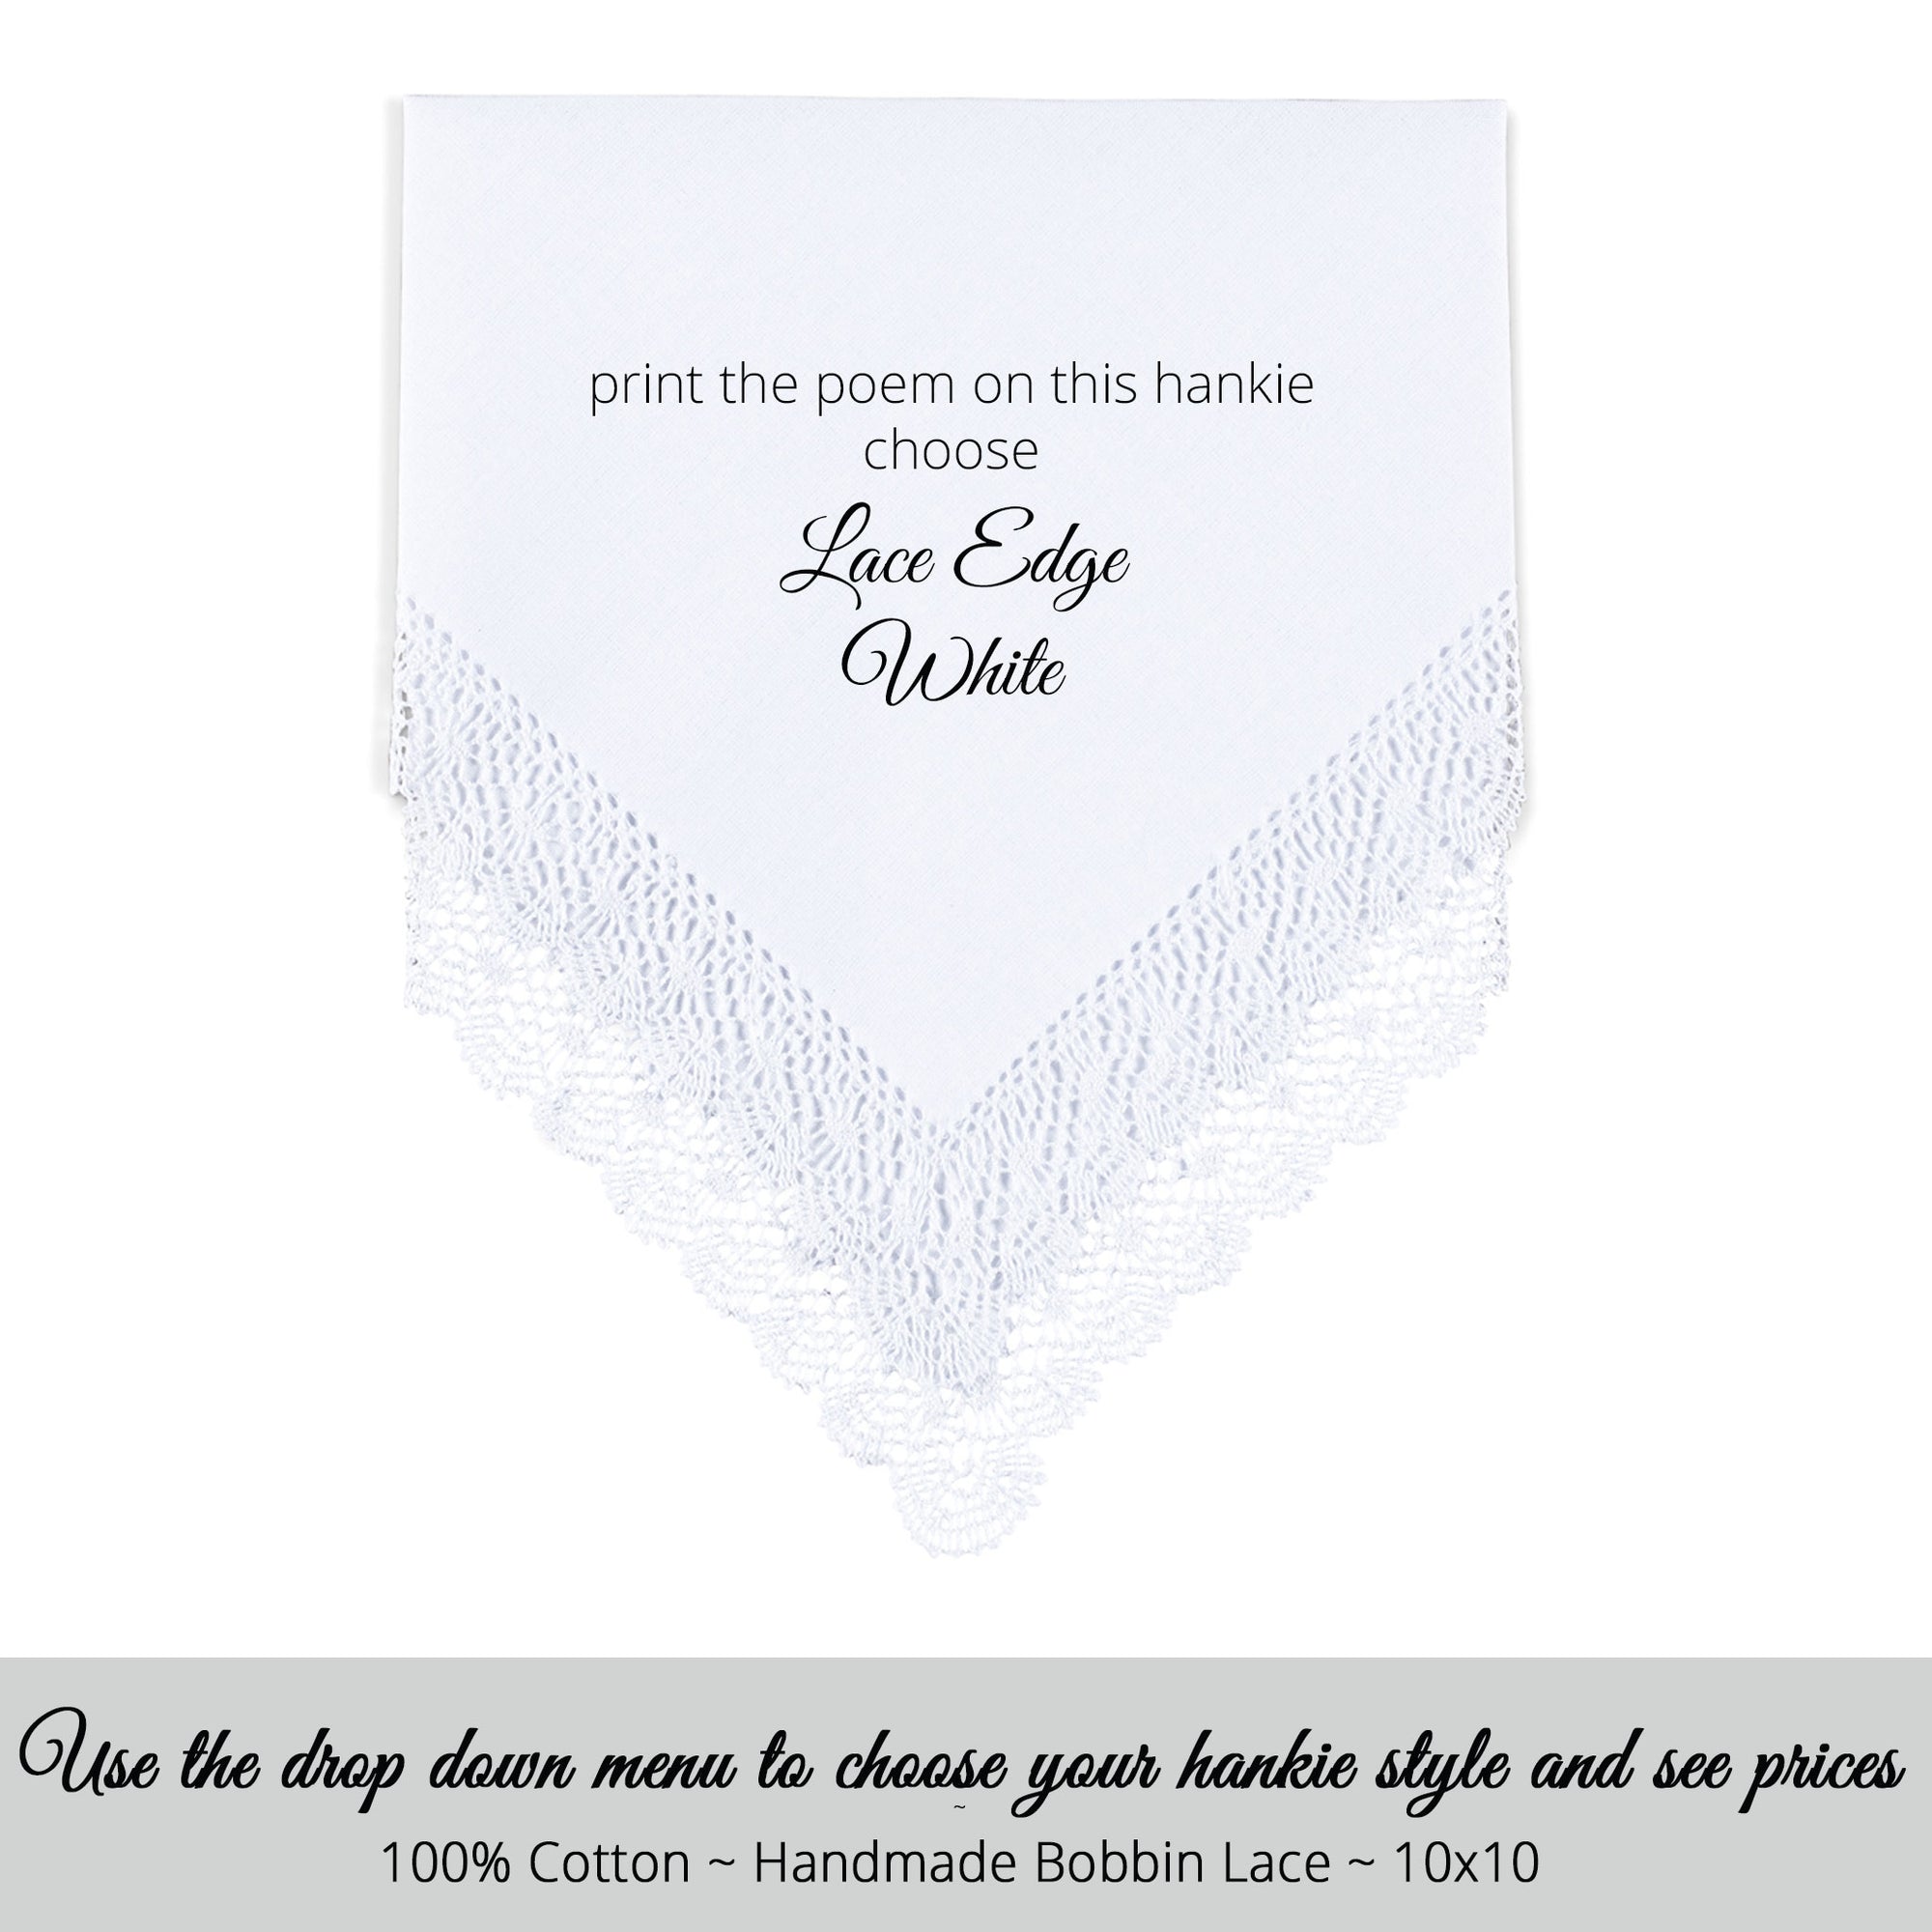 Wedding Handkerchief white with bobbin lace poem printed hankie for the jr. bridesmaid